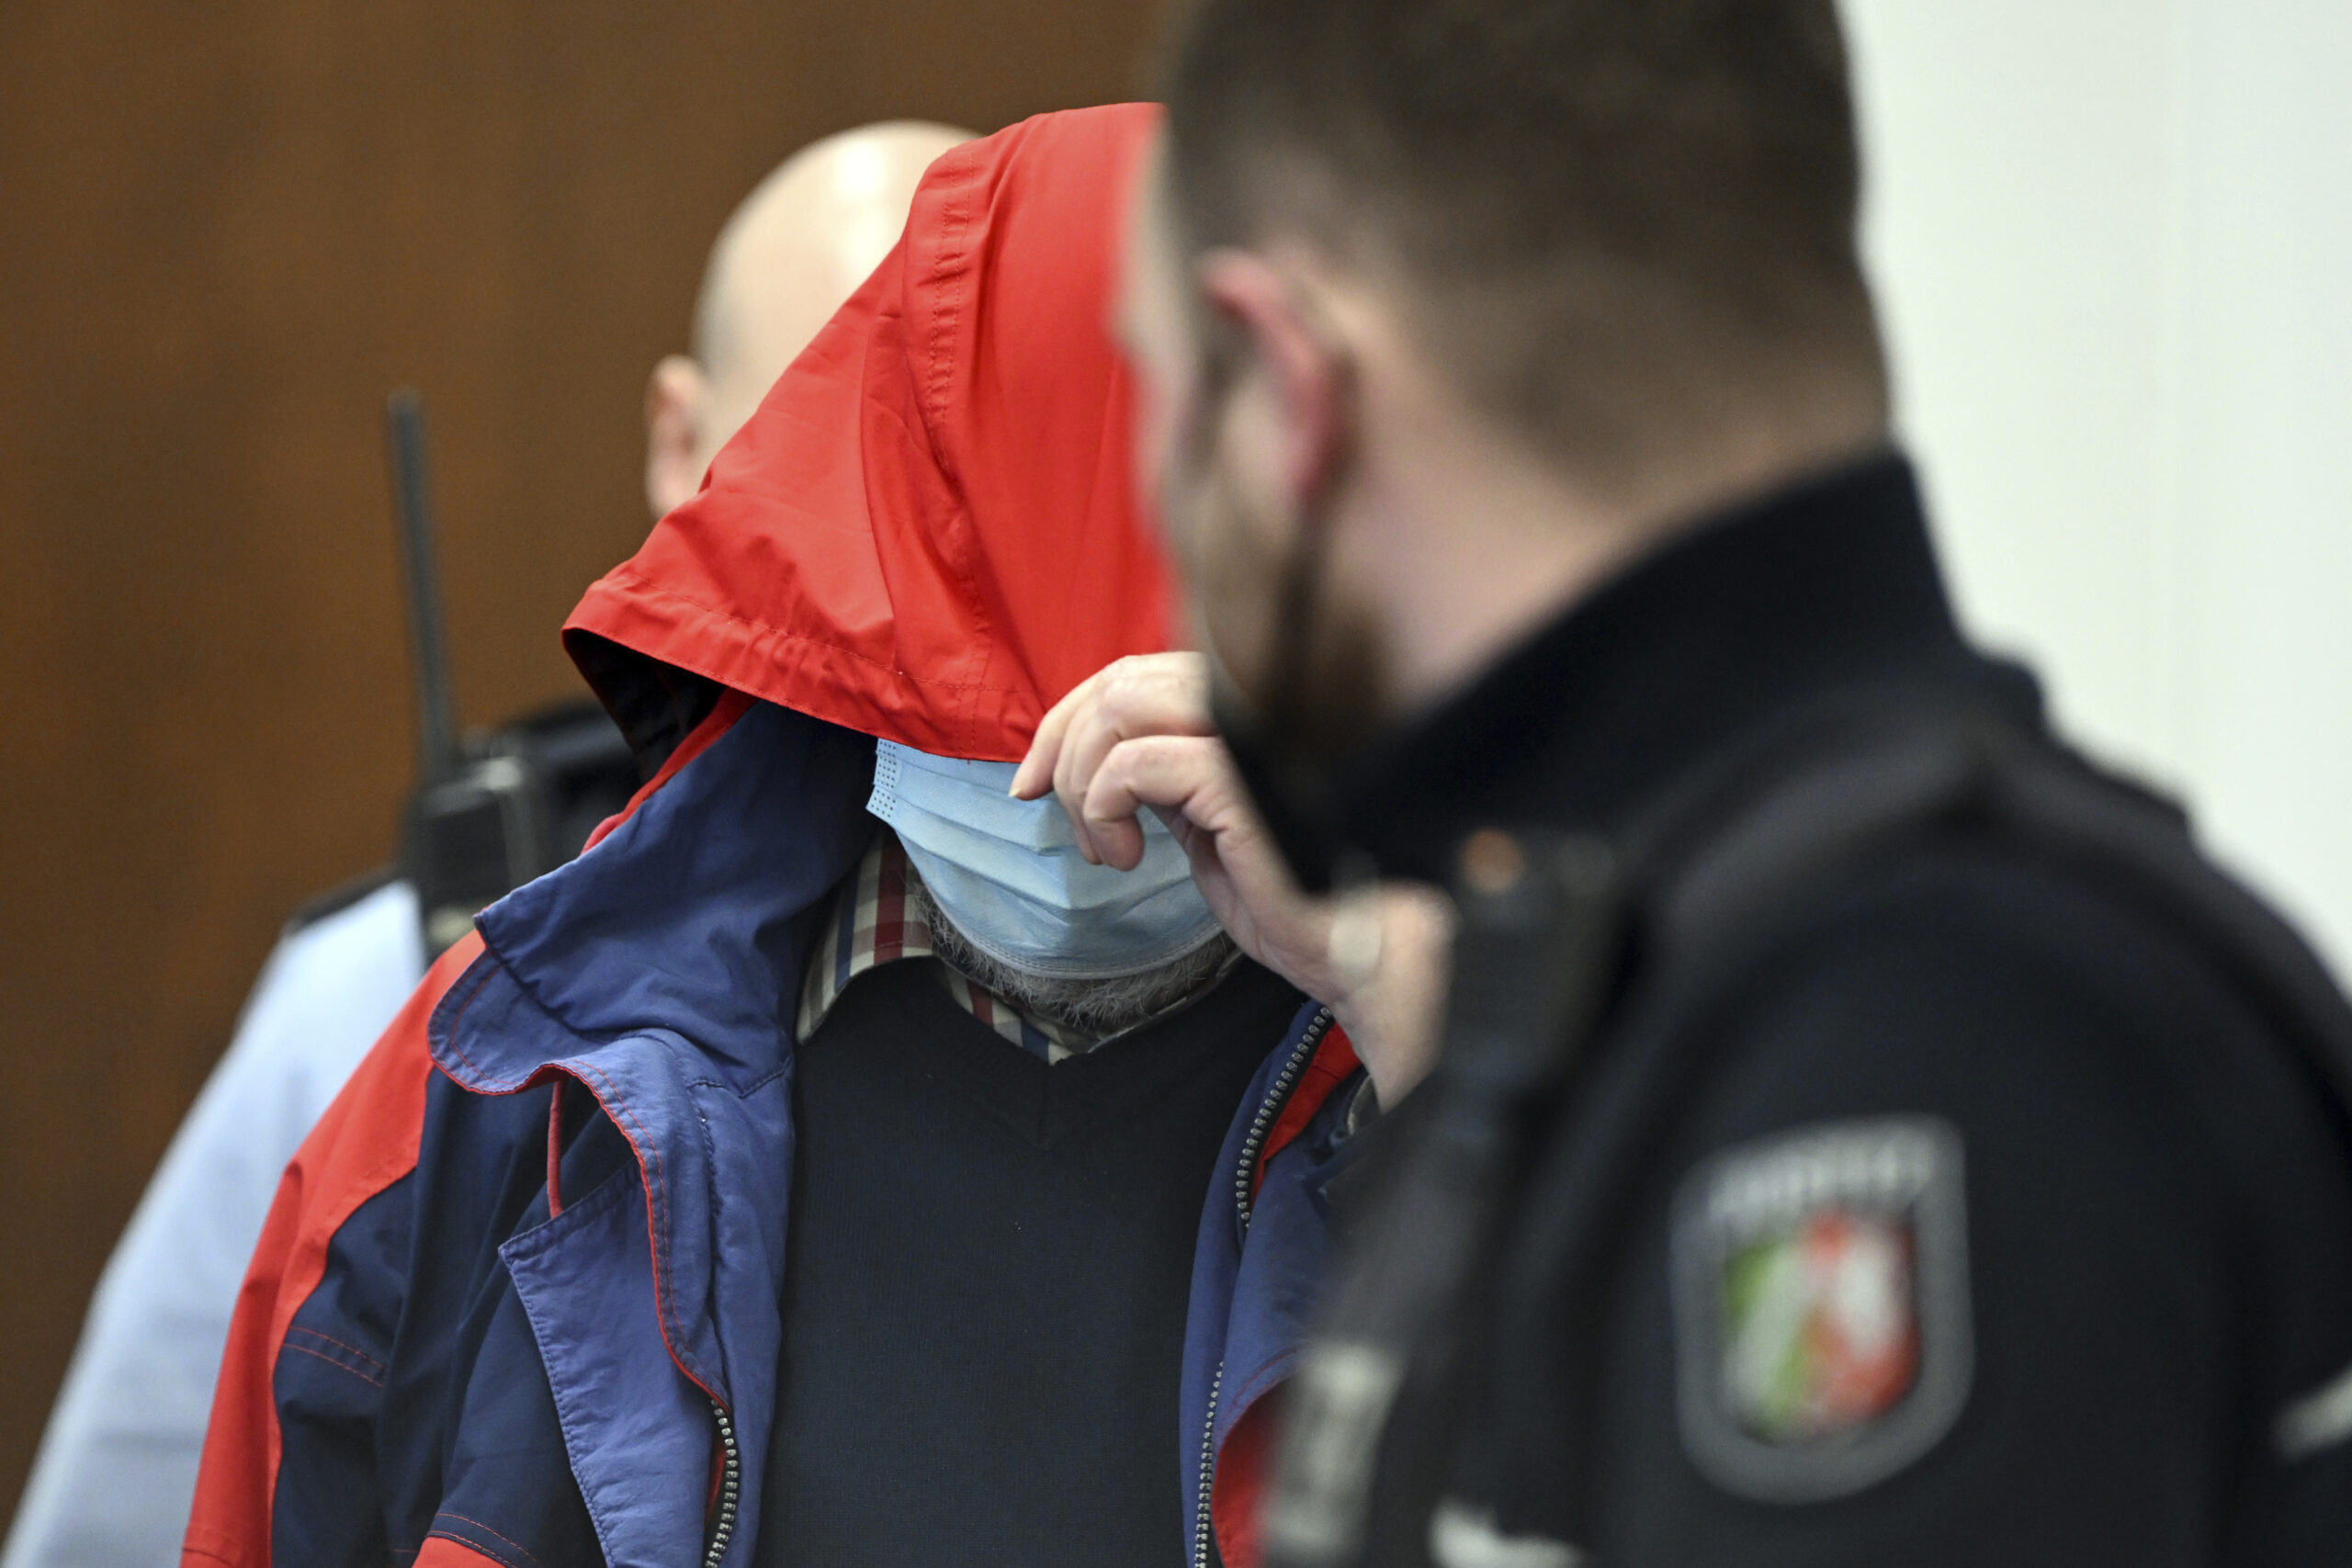 The accused Catholic priest is led into the courtroom in Cologne, Germany, Friday, Feb.25, 2022. On Friday, the Cologne Regional Court sentenced a Catholic priest to twelve years in prison for the sexual abuse of children. The 70-year-old priest must also pay damages of 5,000, 10,000 and 35,000 euros to three female joint plaintiffs. (Federico Gambarini/dpa via AP)